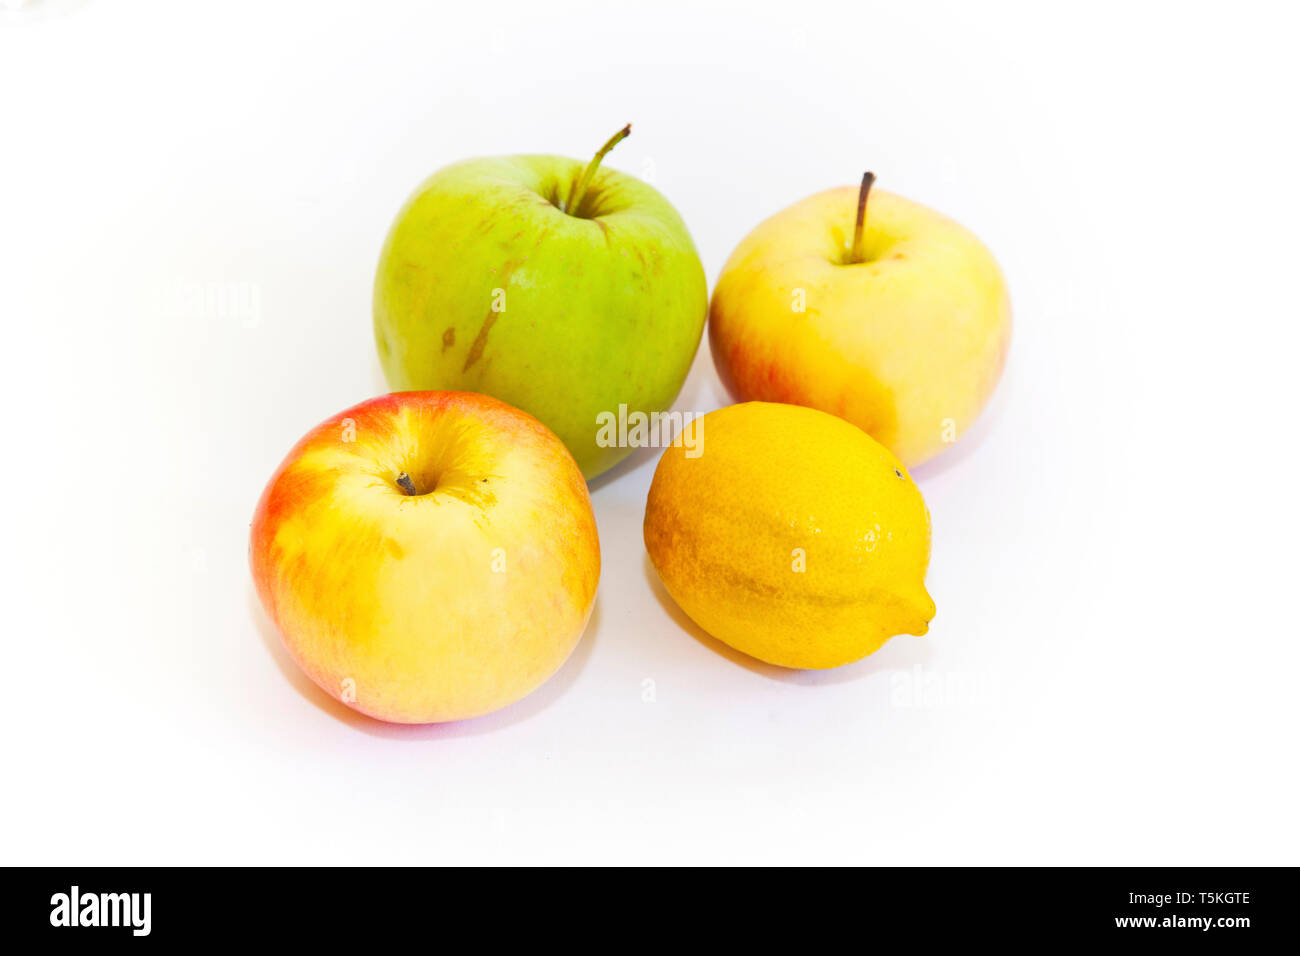 apples on the table, isolated Stock Photo